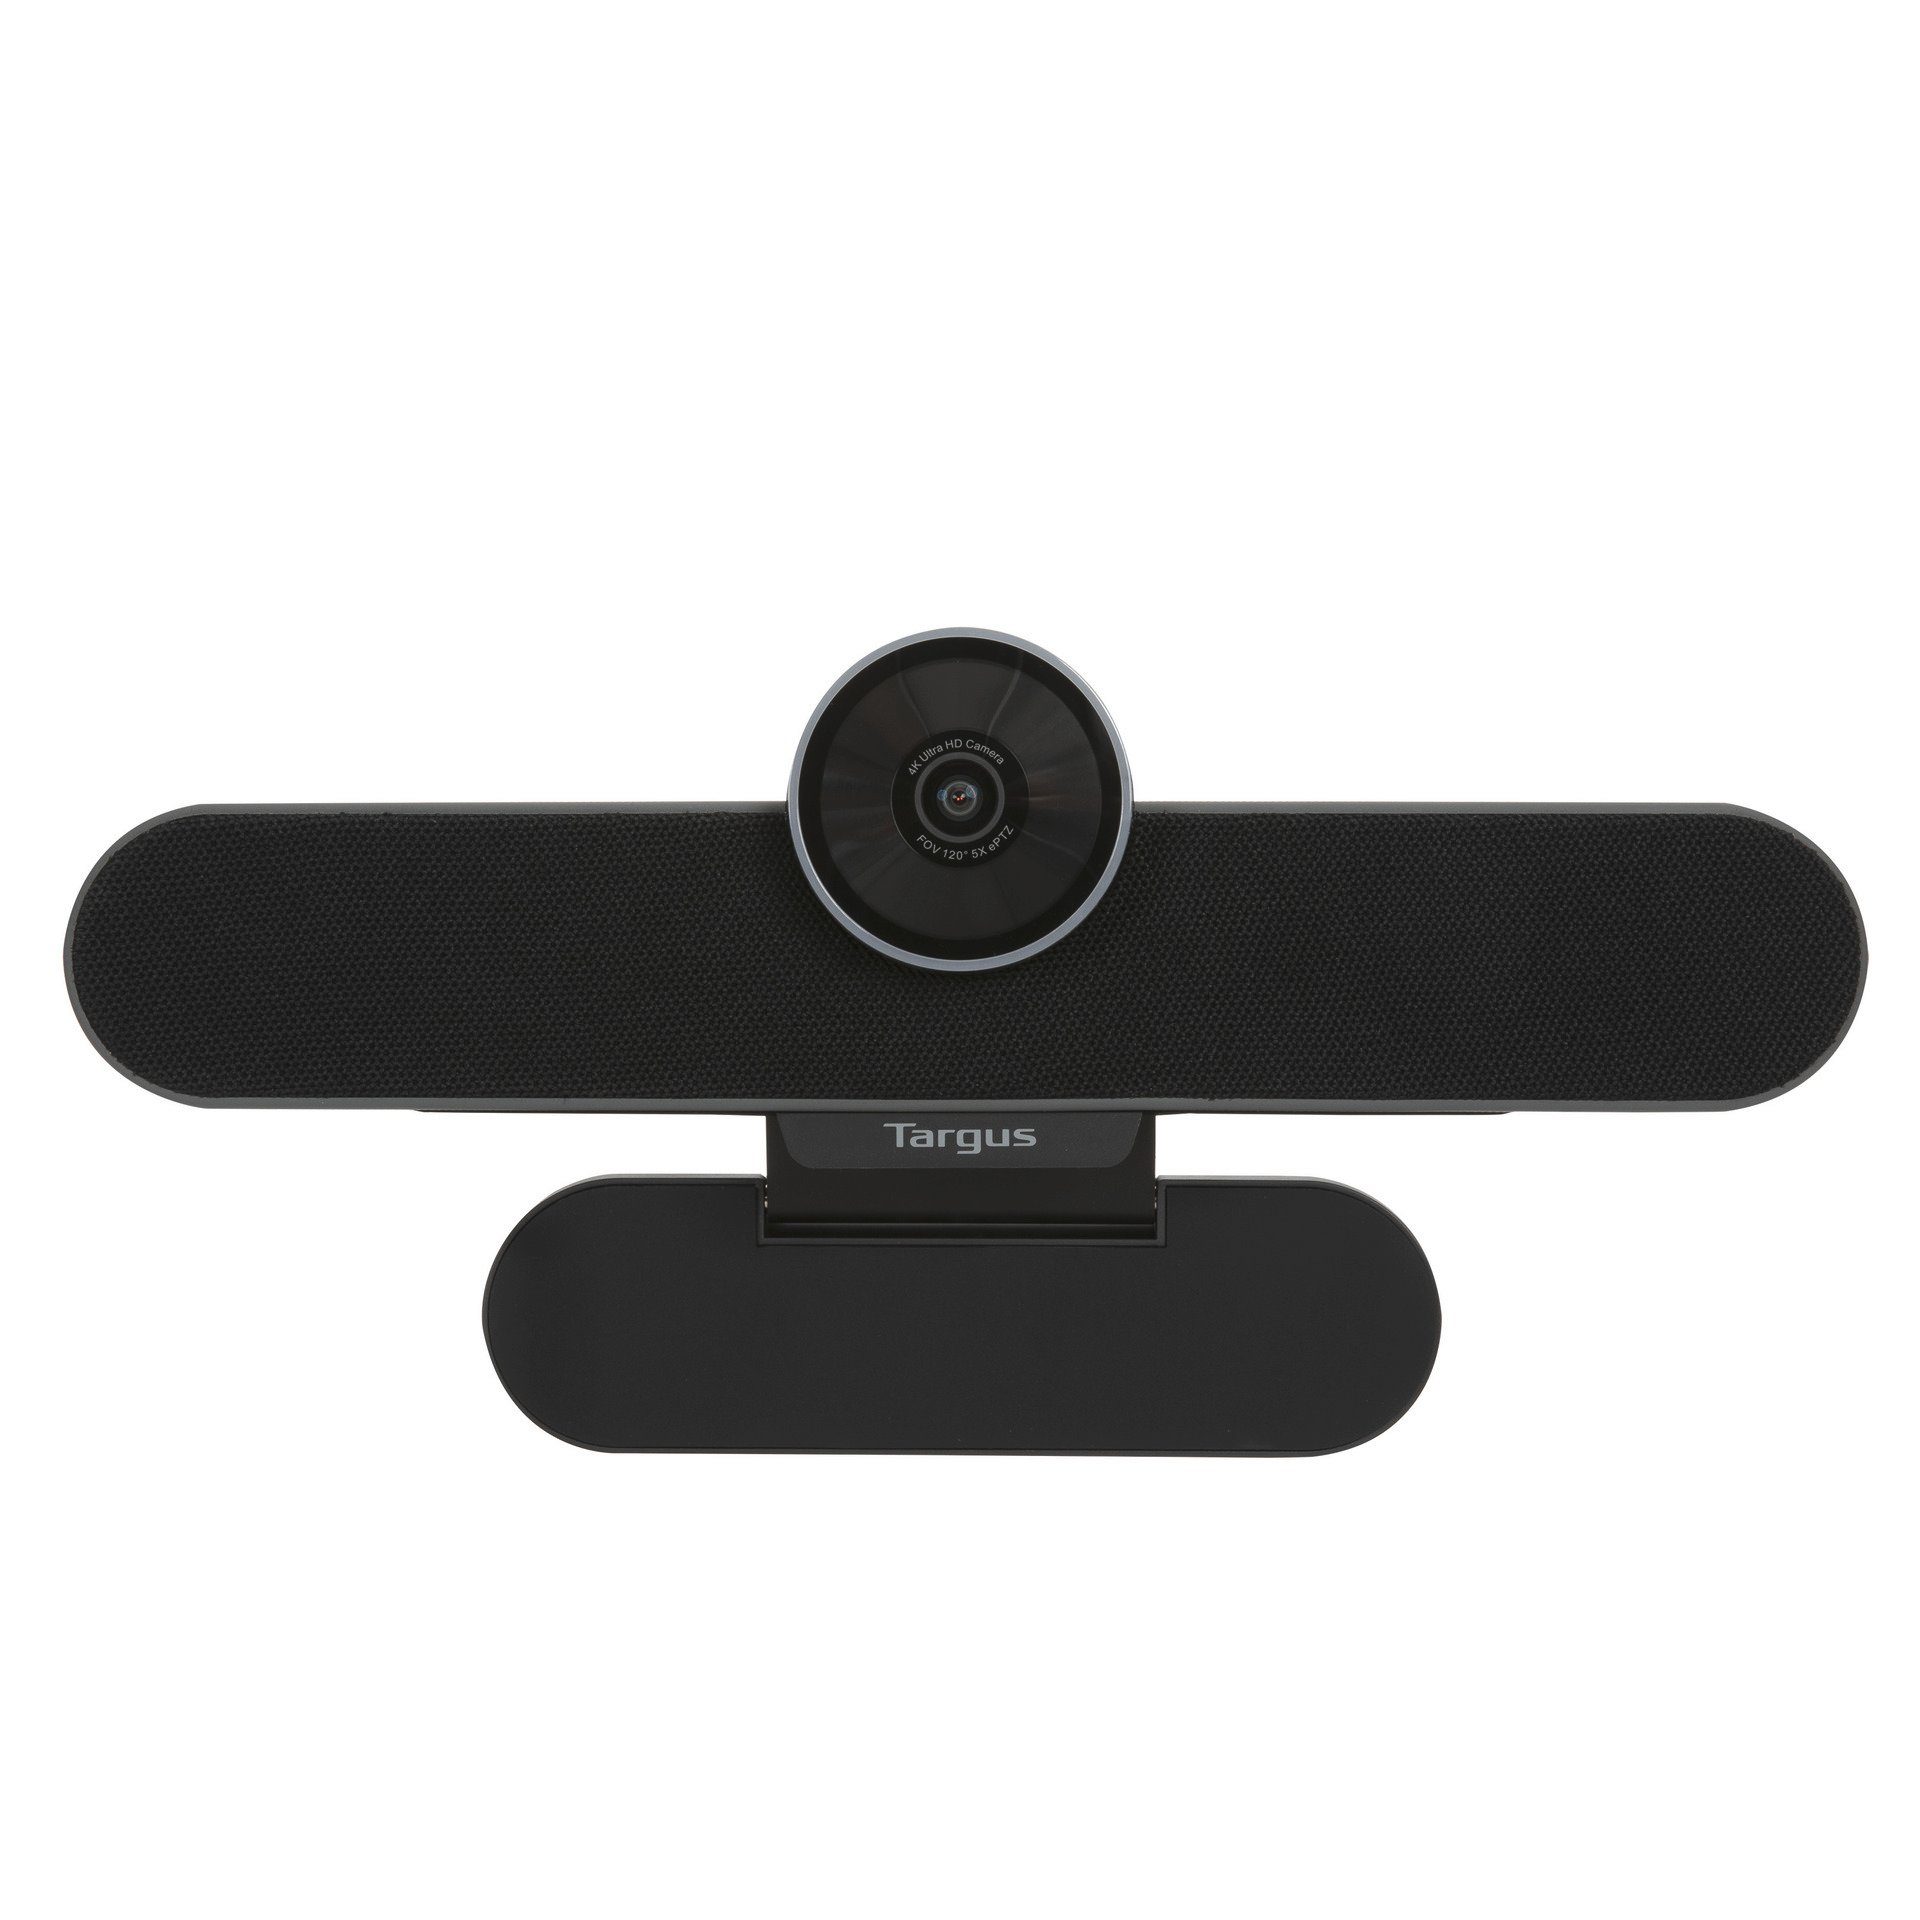 Targus All-in-One 4K Conference System Netzteil) (4K Webcam EU Ultra HD, Mit